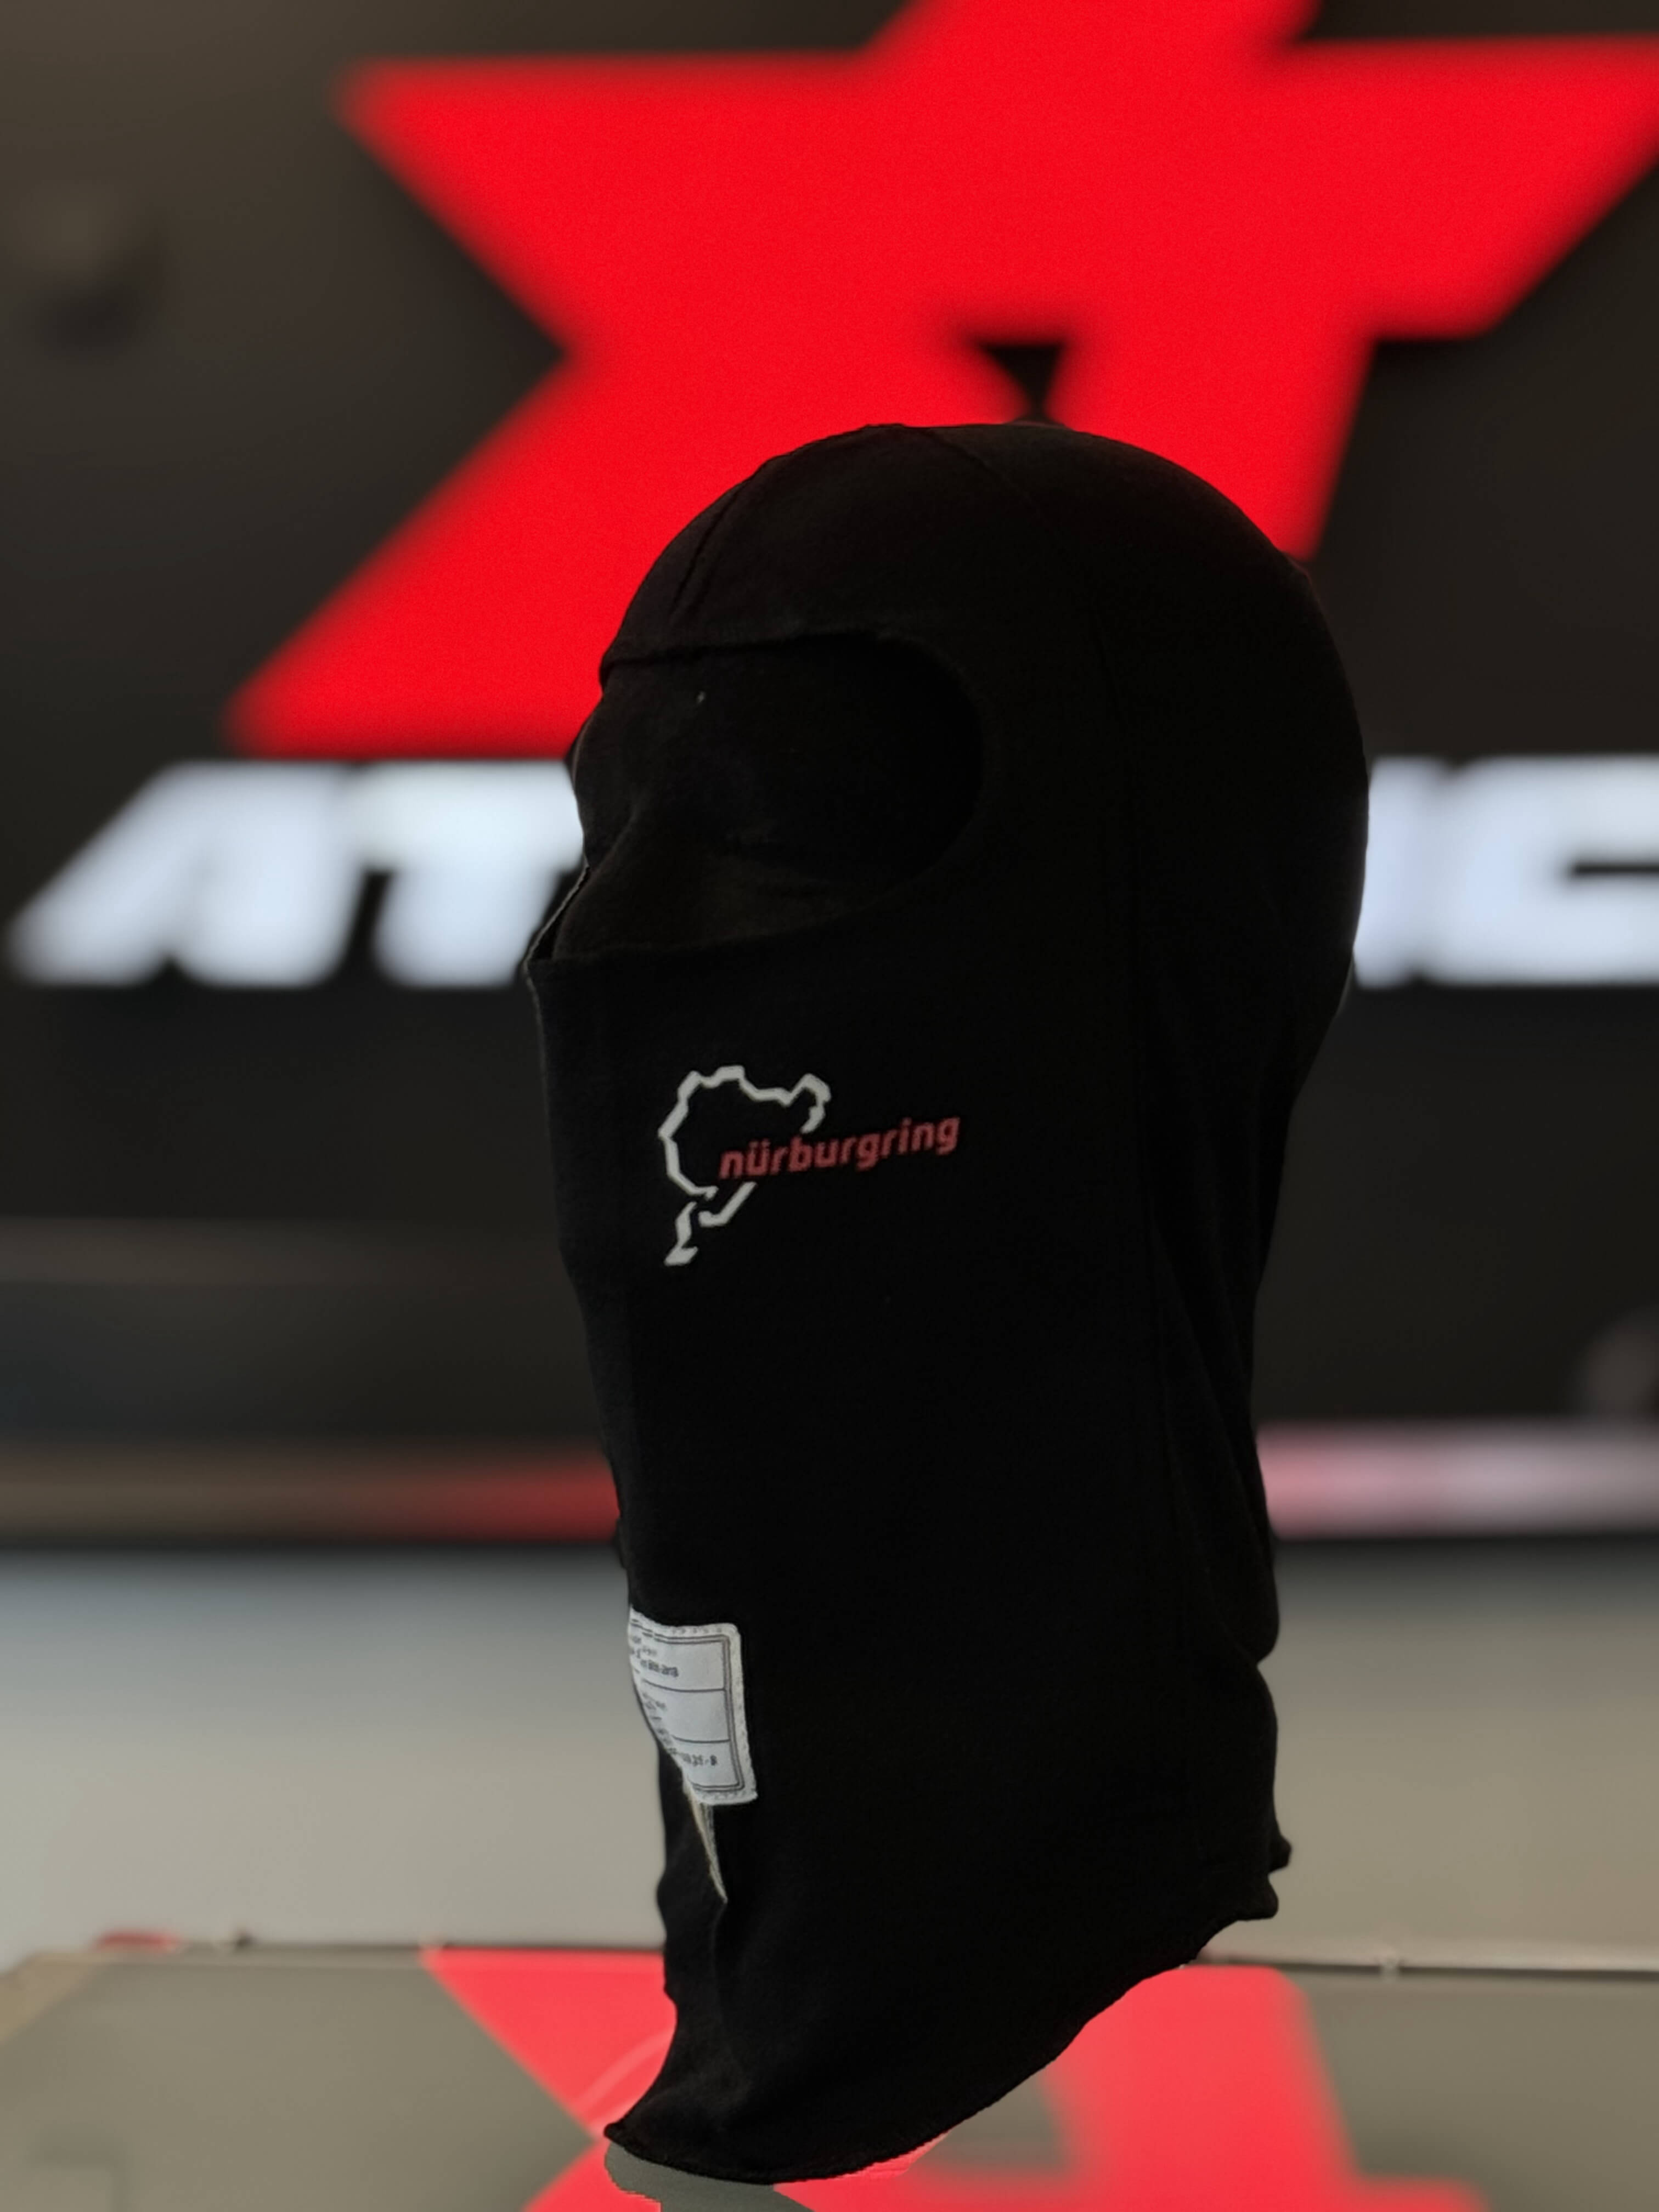 ARD AT018AZB-NBR Balaclava Atomic Nürburgring Edition FIA, Black, One Size (Officially Licensed Nürburgring Product) Photo-0 